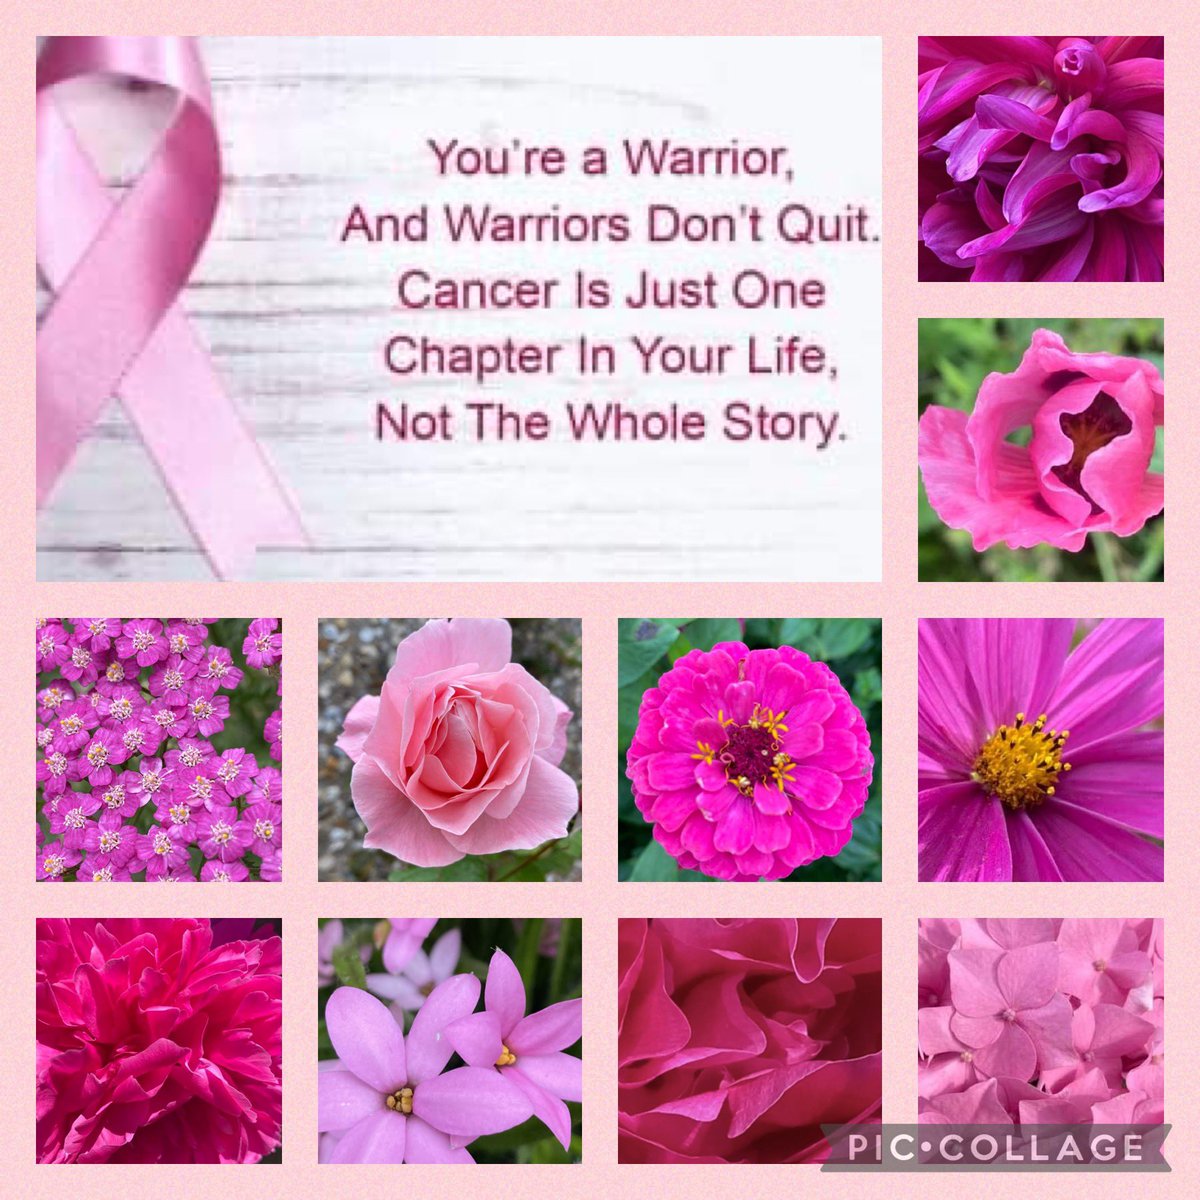 Helping to turn #Twitter all shades of #Pink 4 #WorldCancerDay 🌸💗🎀, while sharing positive #FridayFeeling vibes, & supporting #MentalHealthAwareness 🤗🌸 
Have an extra special #weekend & share #love & #hope!🤗🌸💗#Cancerprevention #FridayMotivation @SU2C #kisscancergoodbye